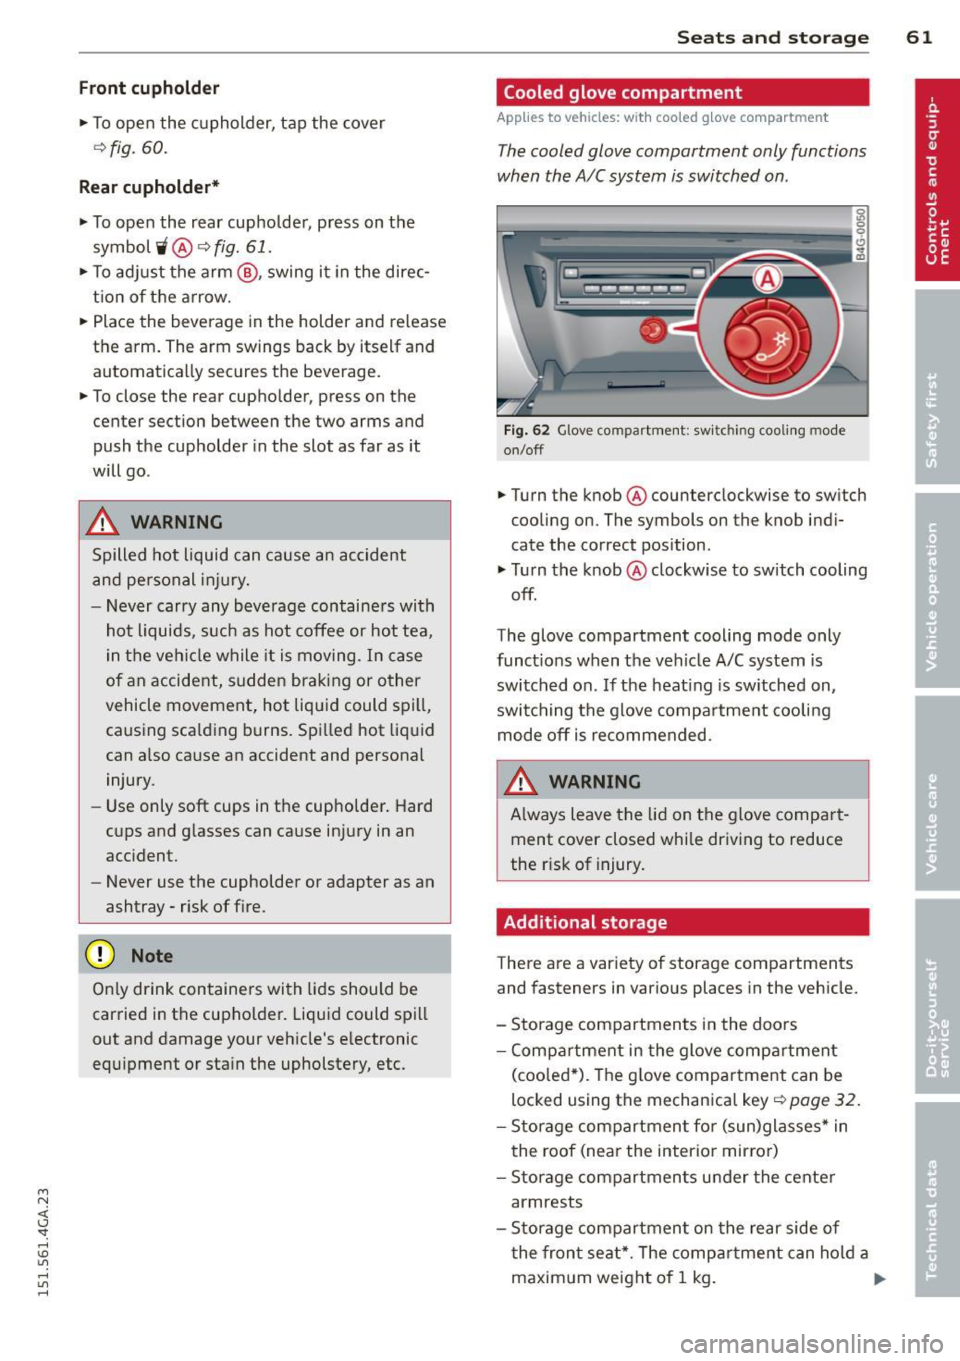 AUDI A7 2015  Owners Manual M N <( I.J "". rl I.O 
" rl 
" rl 
Front cupholder 
• To  open  the  cupholder,  tap  the cover 
¢fig.  60. 
Rear cupholder* 
• To  open  the  rear  cupholder,  press  on  the 
symbol 
i @ ¢ 